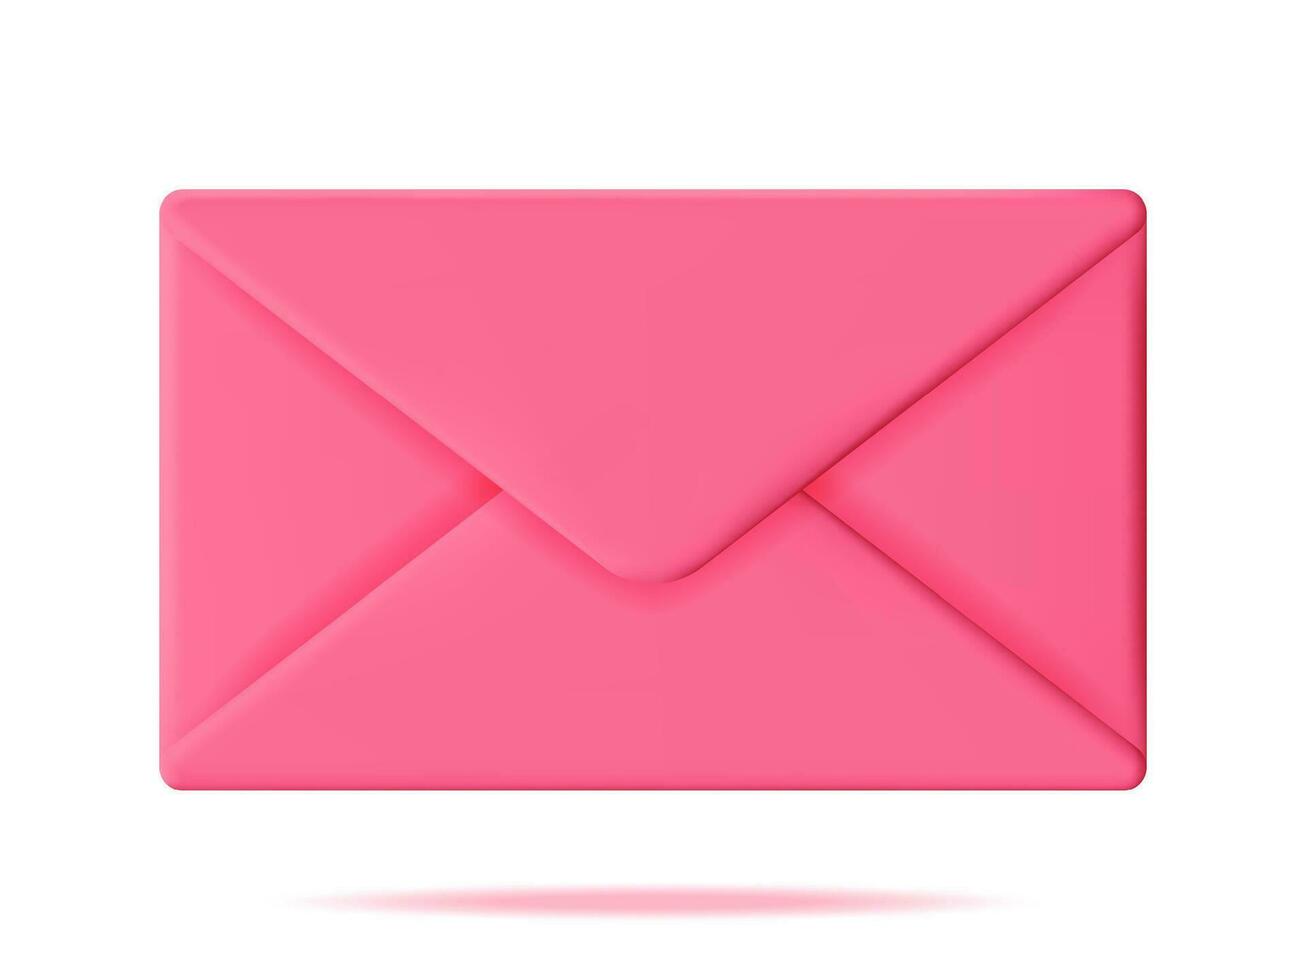 3D Pink Closed Mail Envelope Isolated on White. Render Paper Envelope Icon. Concept of New or Unread Email Notification. Message, Contact, Letter and Document. Vector Illustration